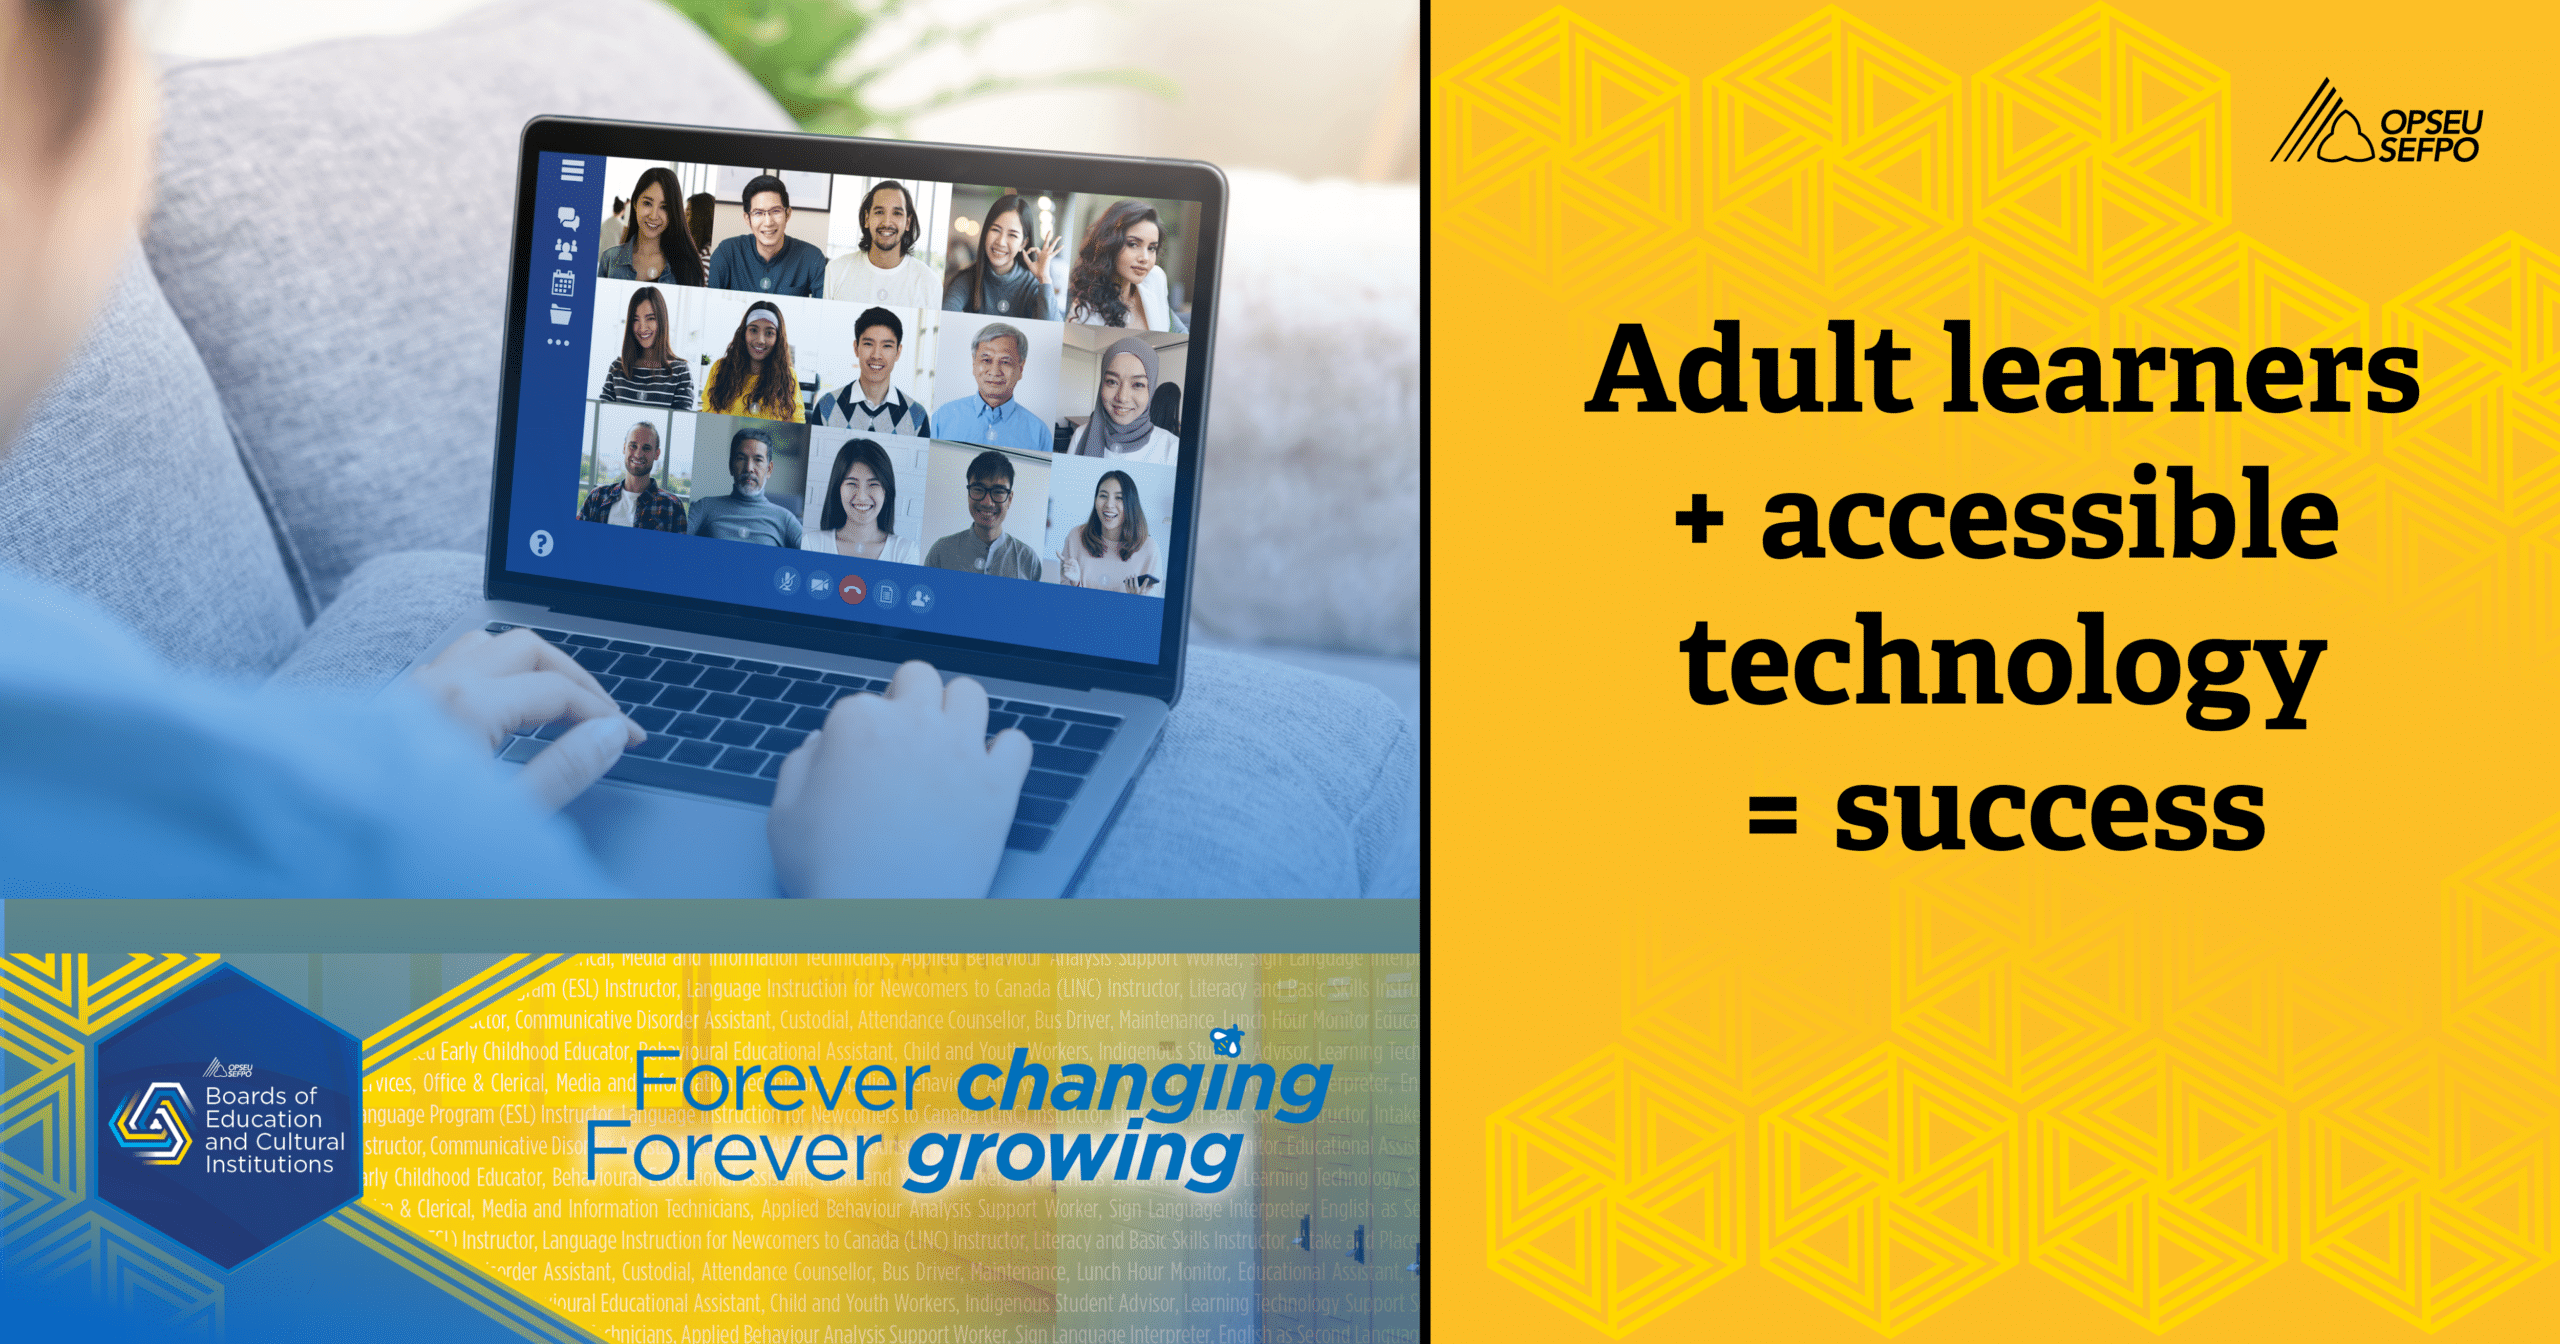 Adult learners + accessible technology = success